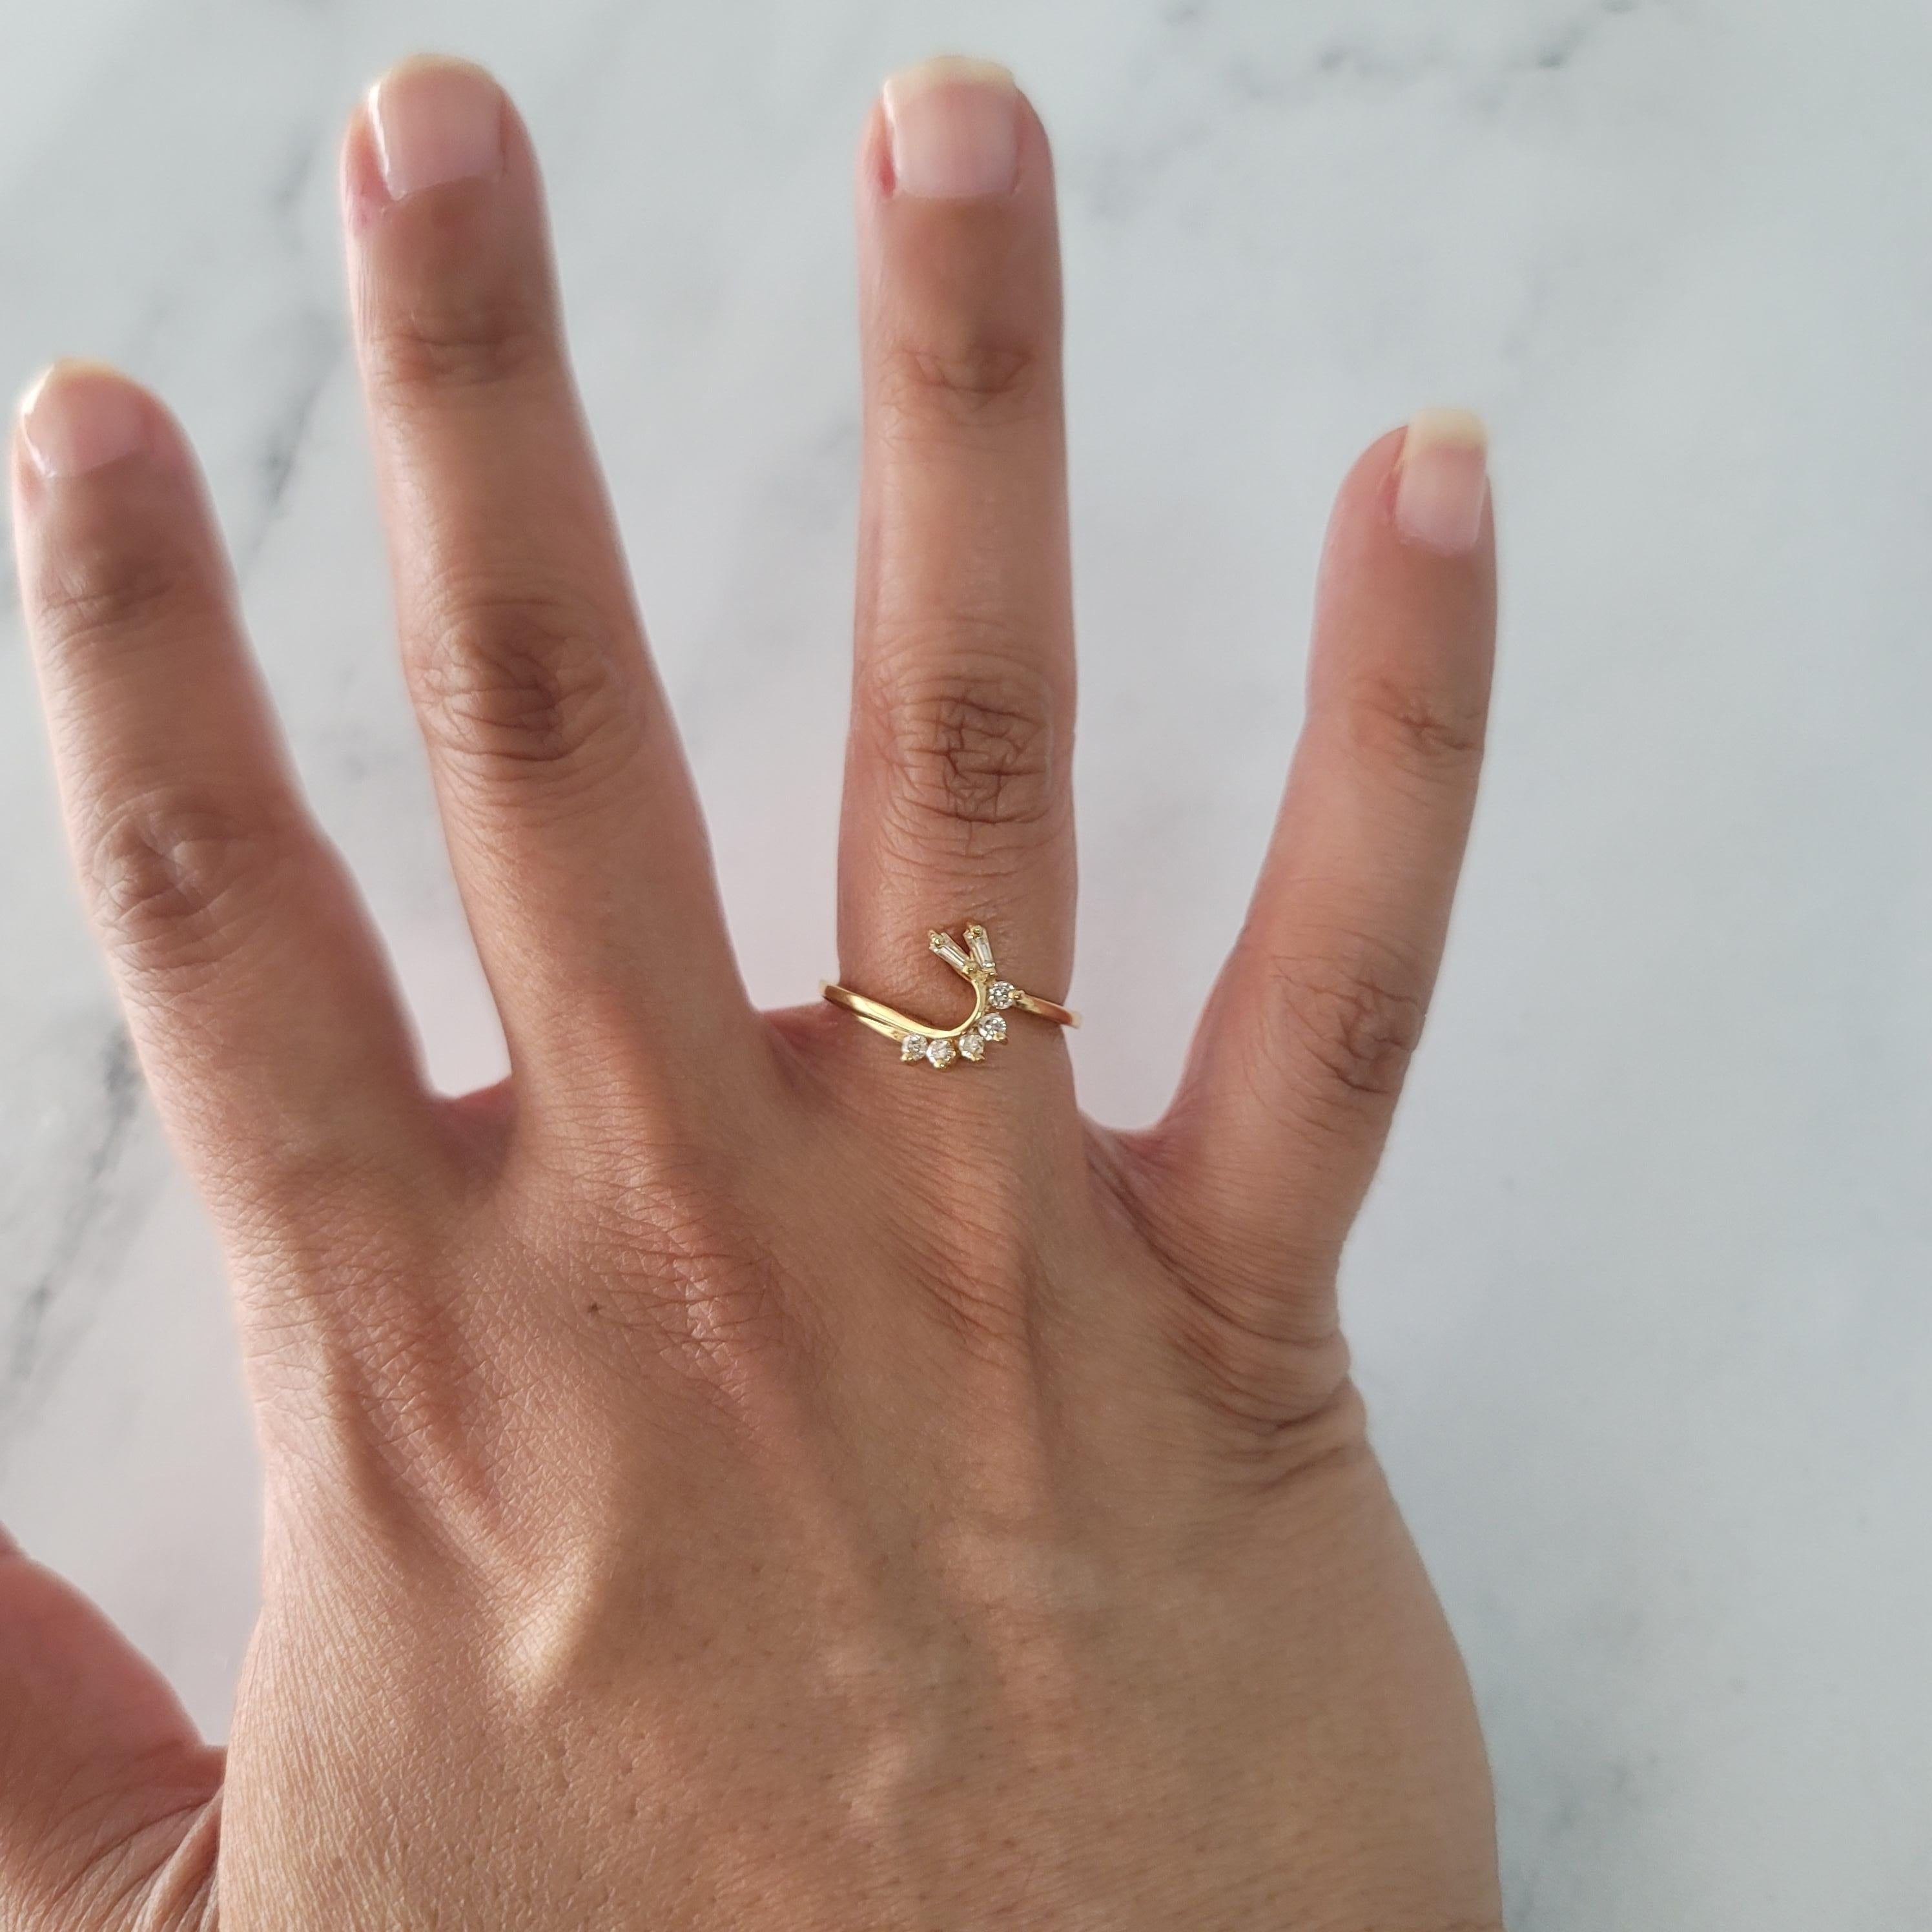 ♥ Ring Summary ♥

Main Stone: Diamond
Approx. Carat Weight: .20cttw
Diamond Clarity: SI1
Diamond Color: H/I
Band Material: 14k Yellow Gold
Dimension Height: 11mm
Gap Measurement: 4mm
Stone Cut: Round